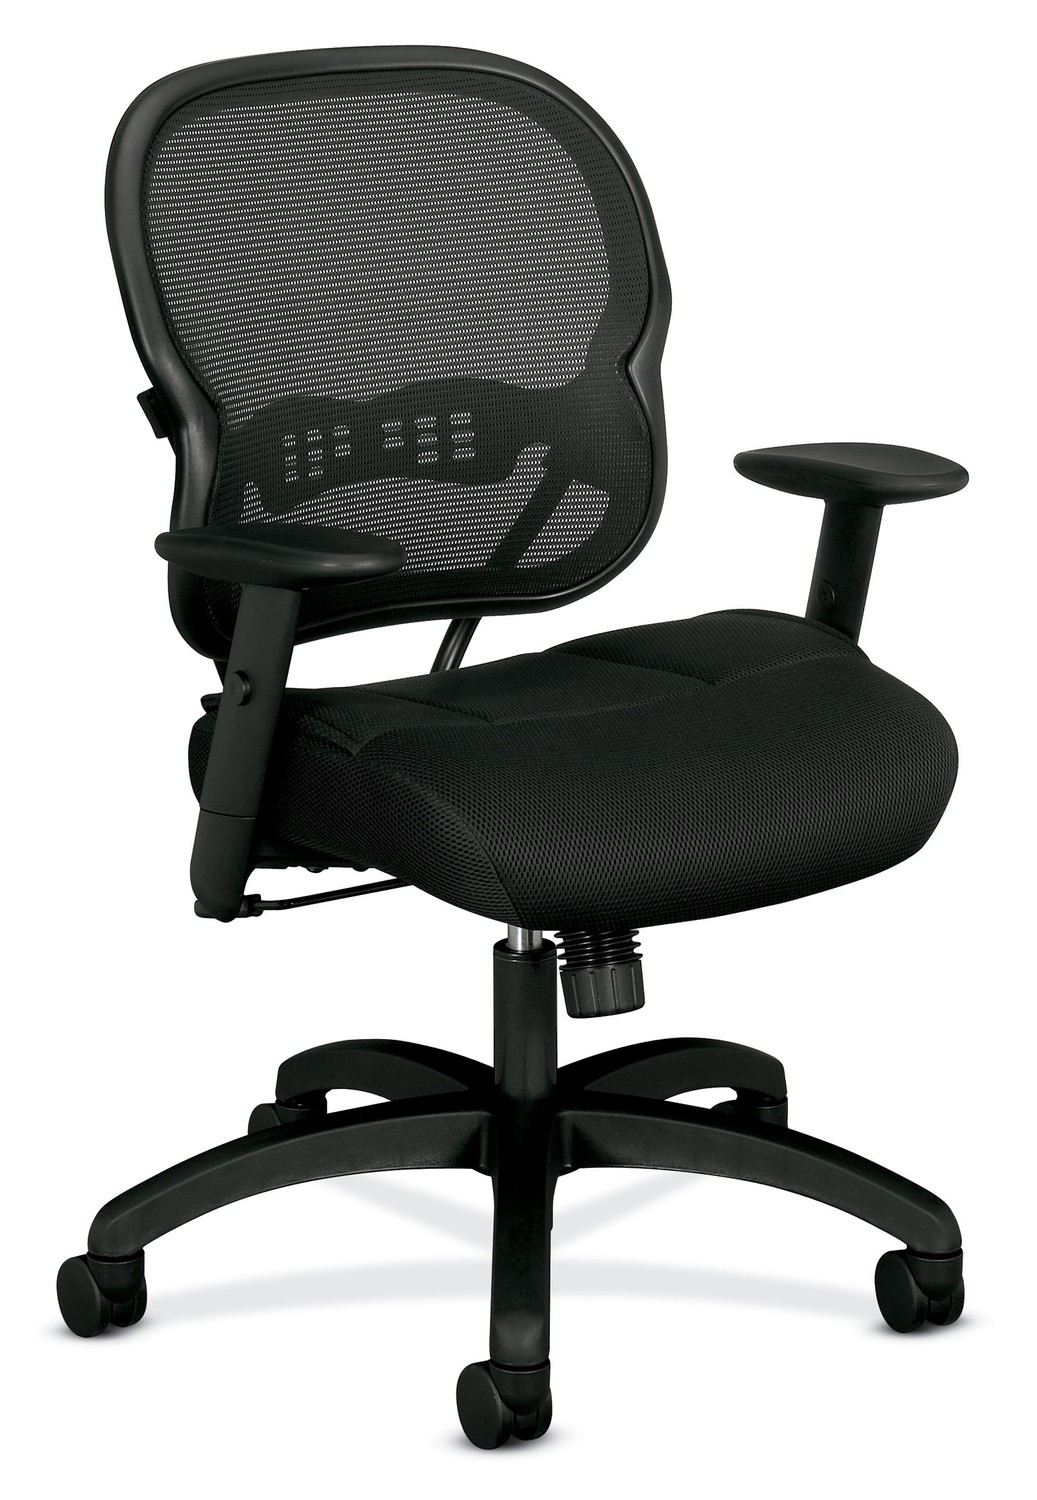 HON Wave Mid-Back Chair - Mesh Office or Computer Chair with Adjustable Arms, Black (VL712)